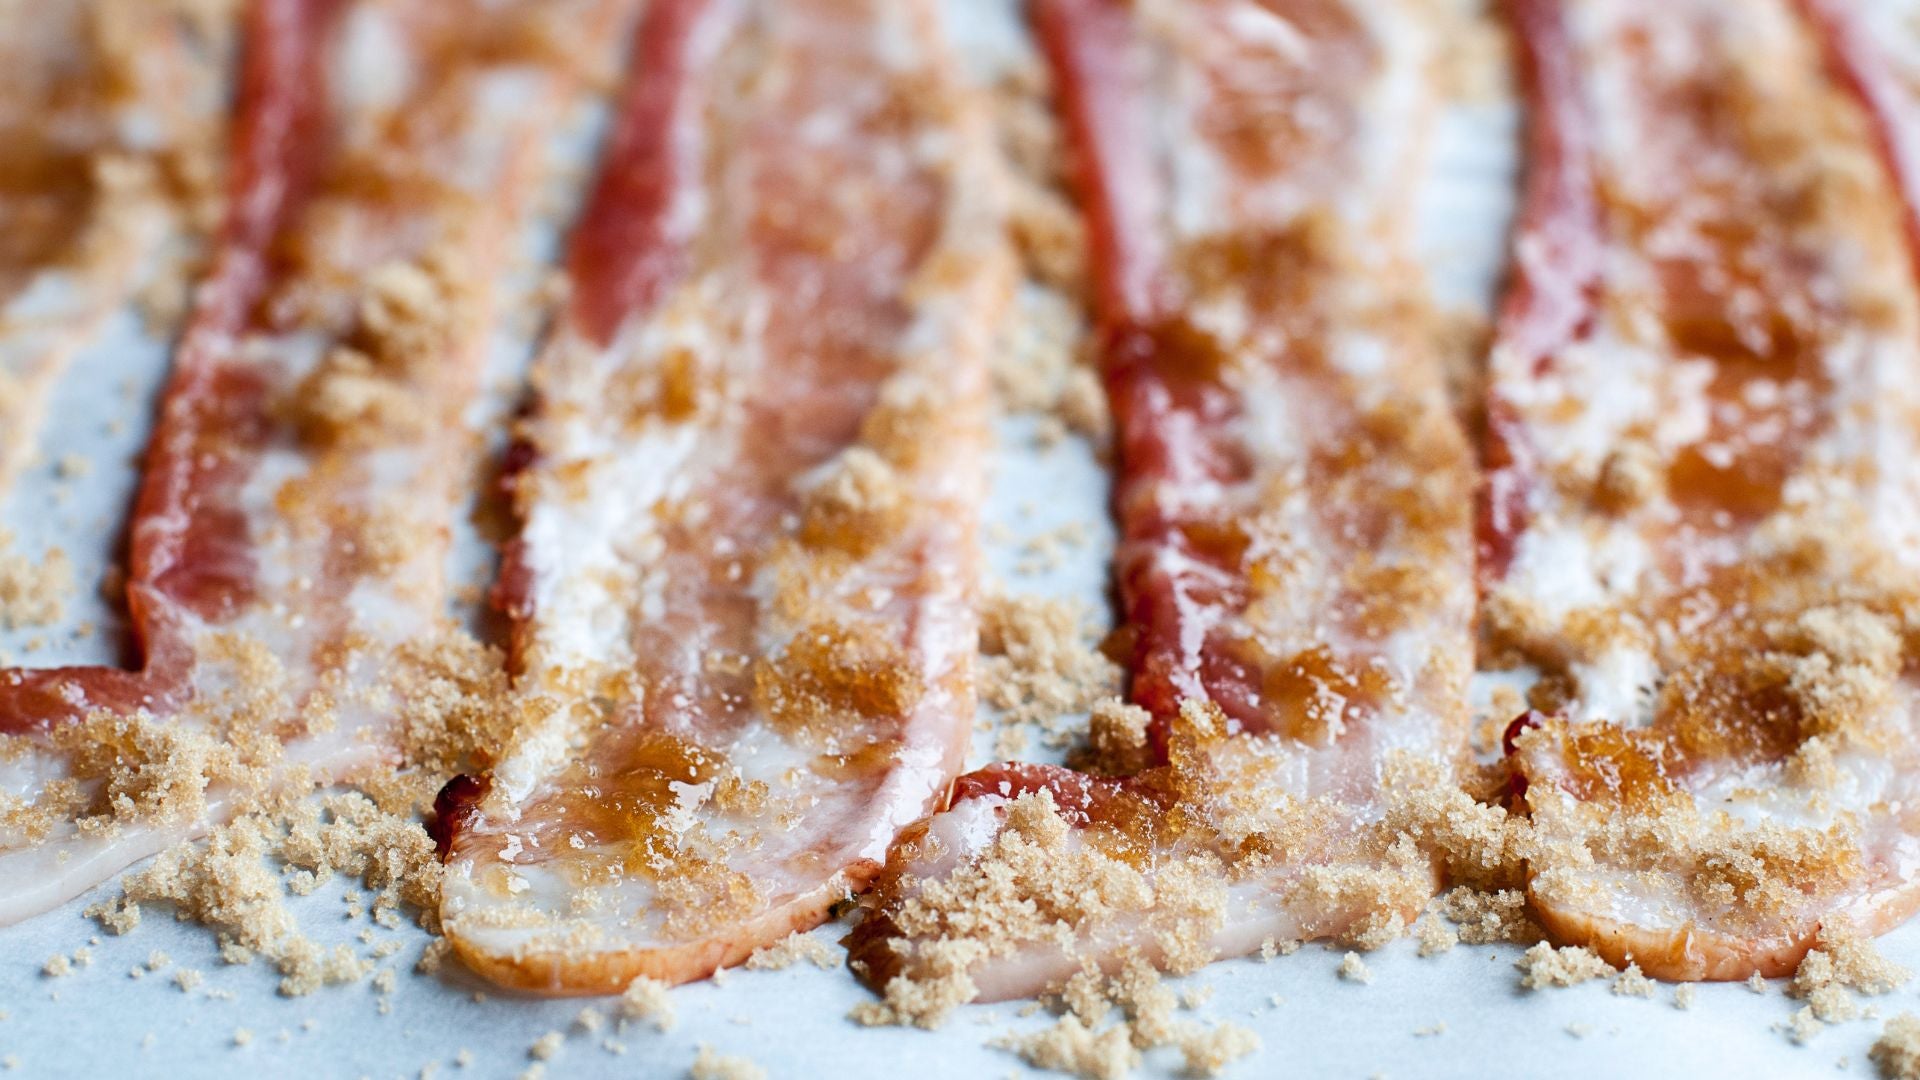 Bacon and maple syrup